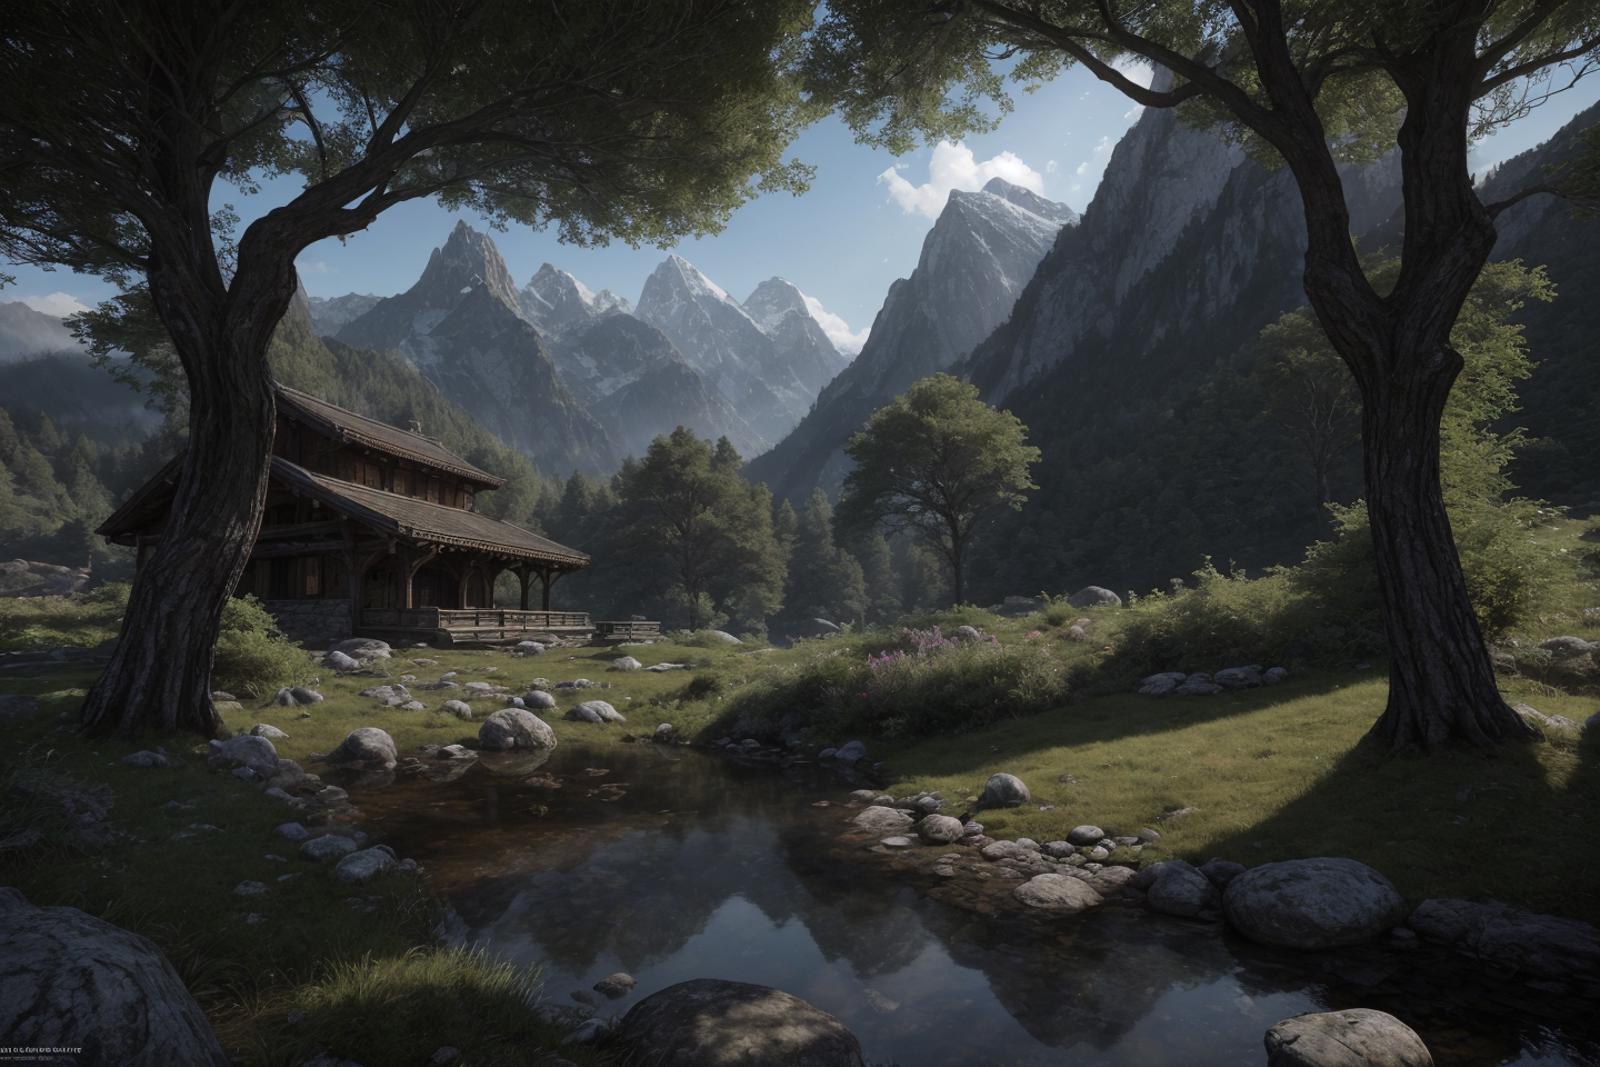 A picturesque scene of a cabin nestled between mountains and a stream.